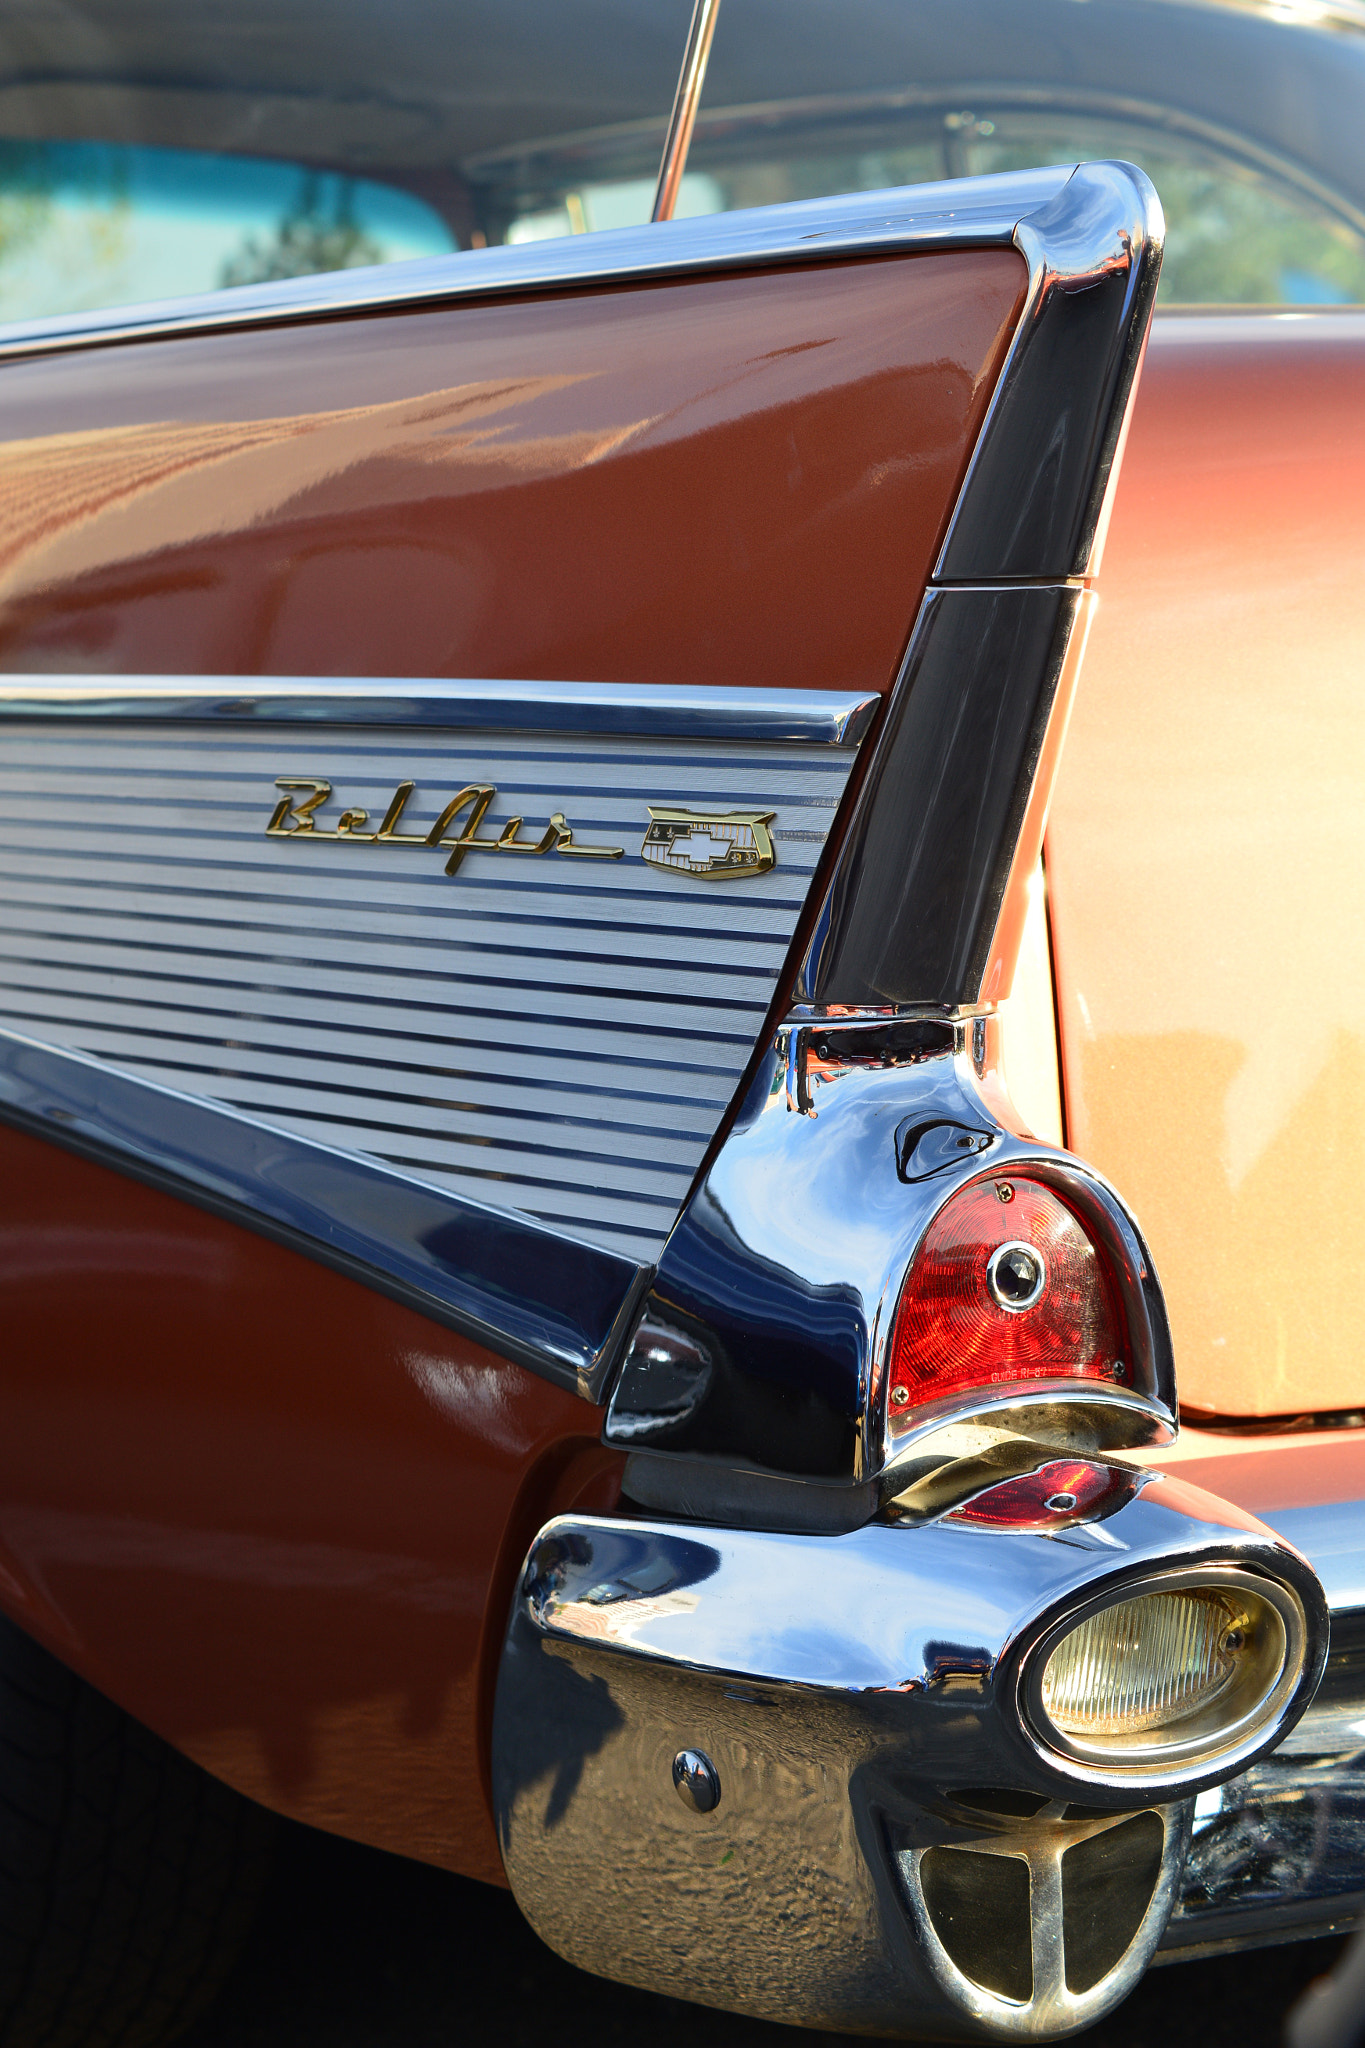 Nikon D800E sample photo. Chevy belair hot august nights photography